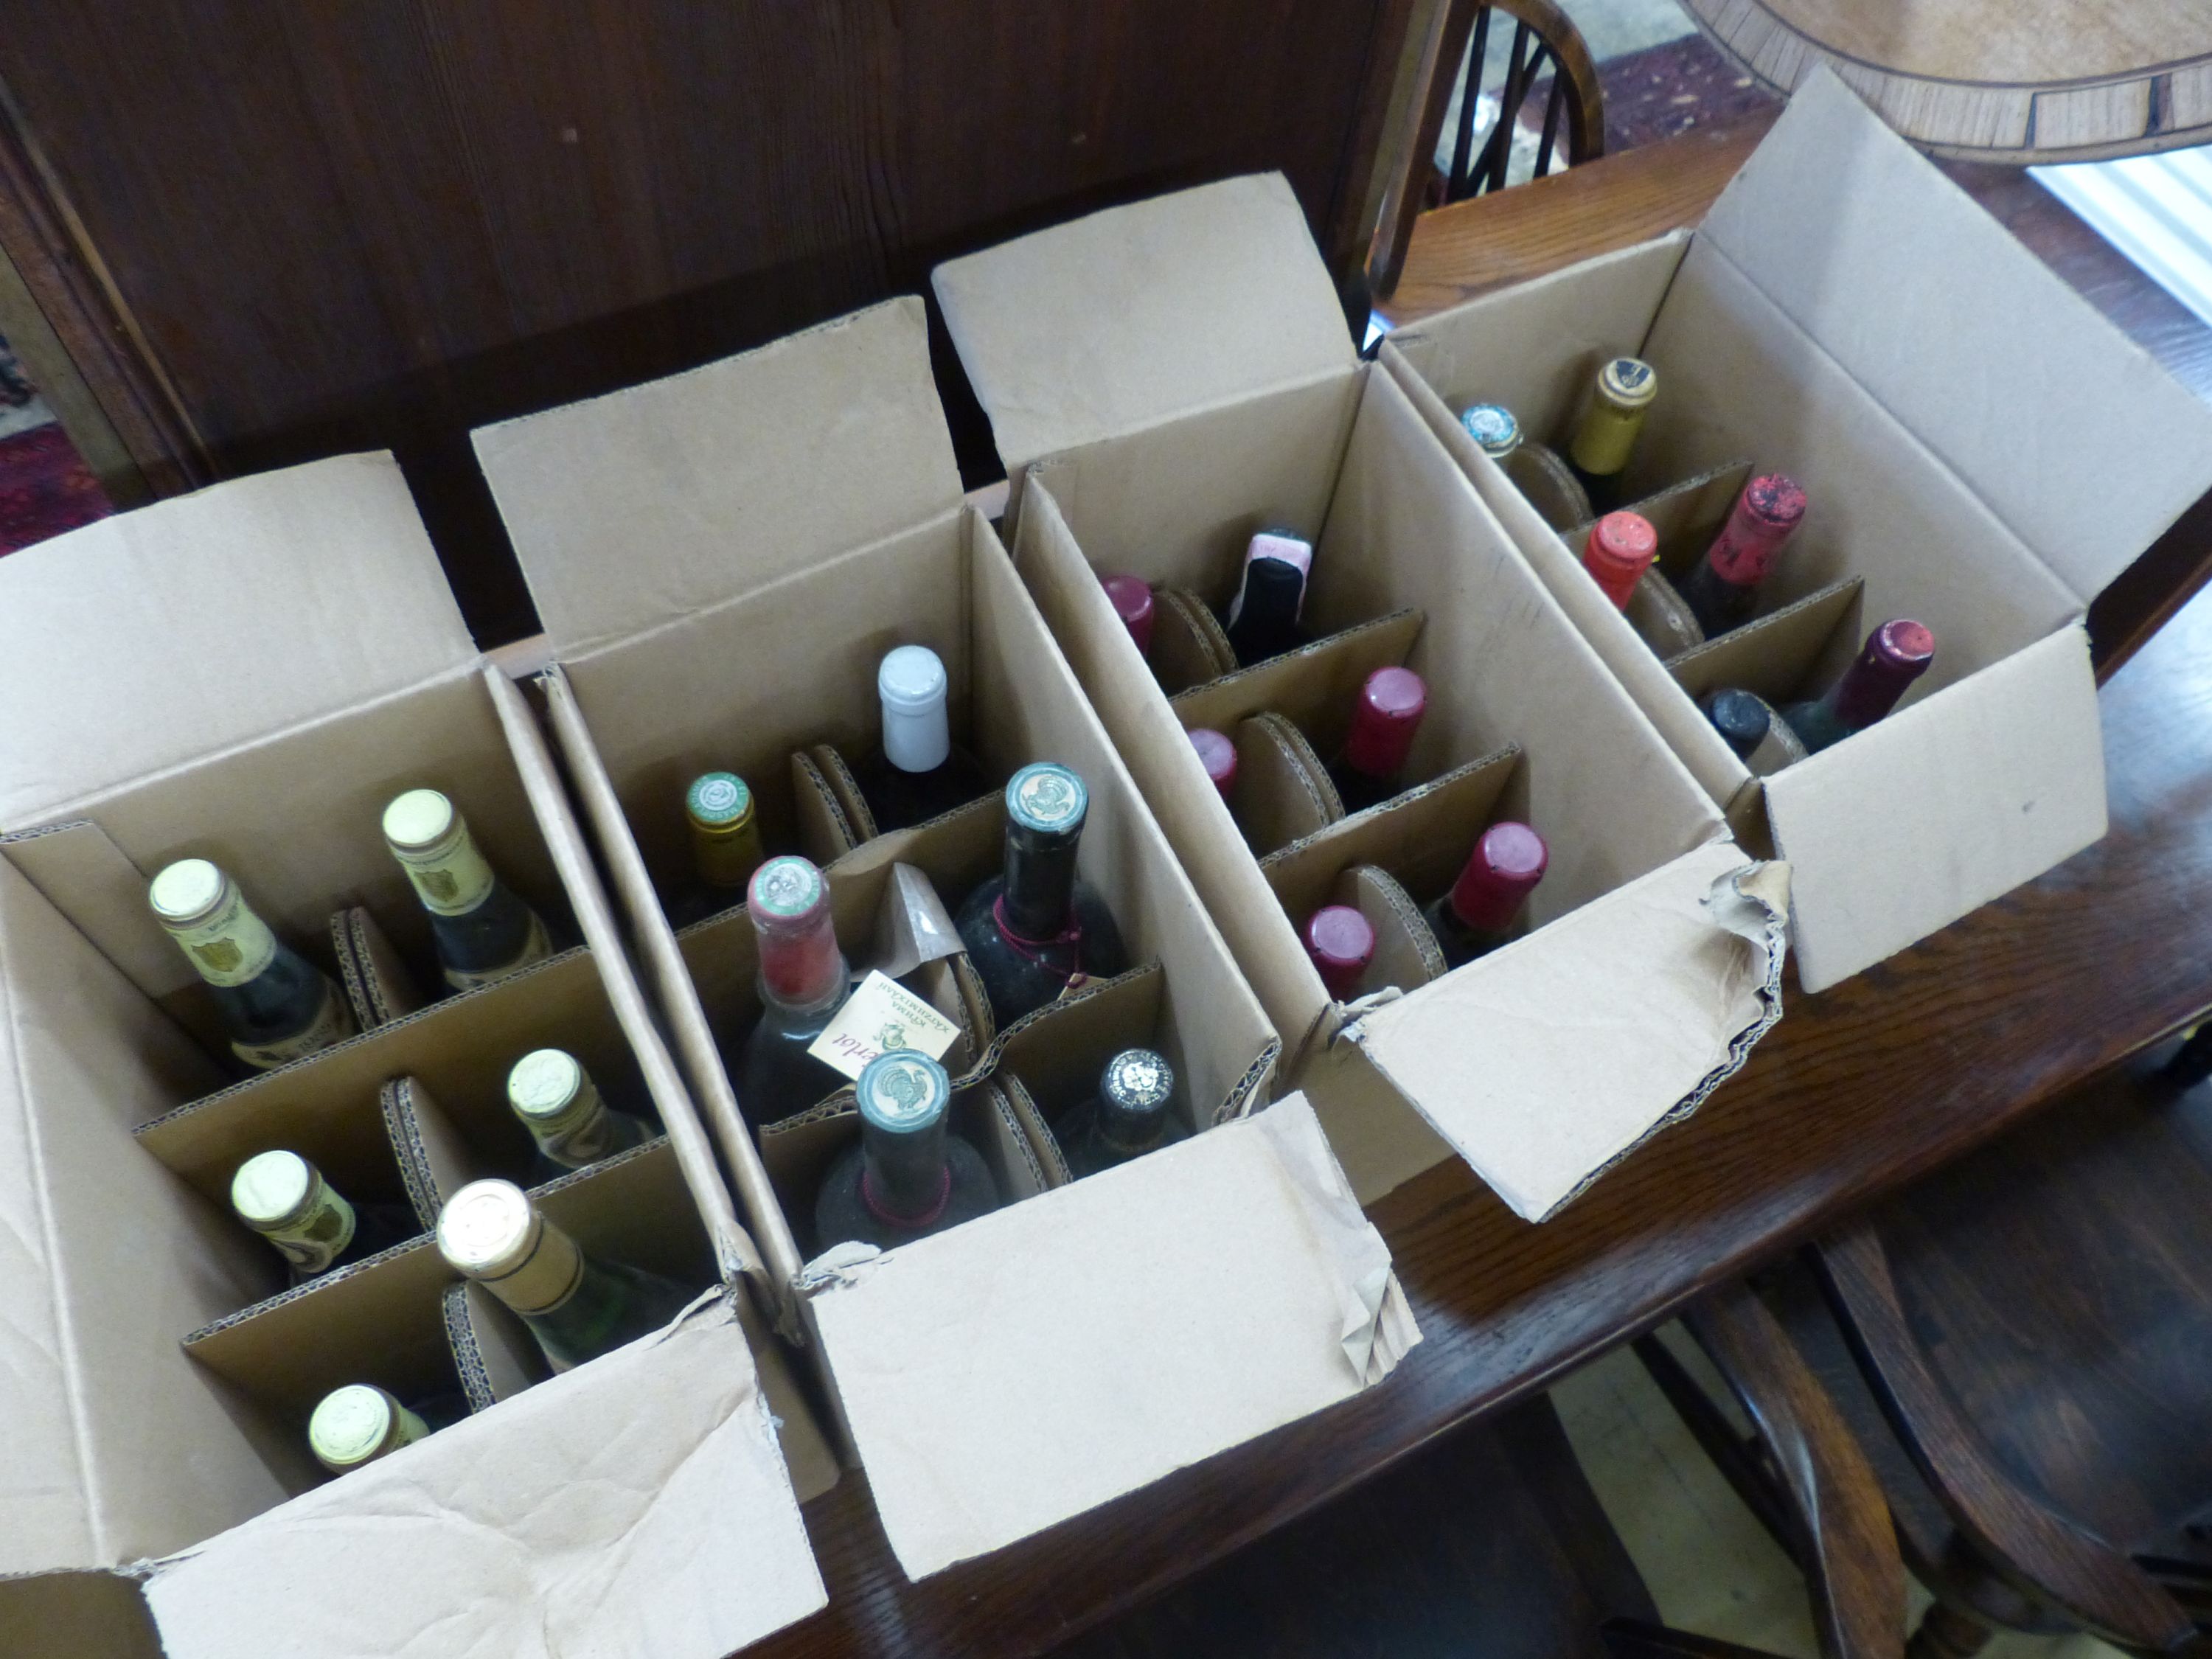 Approximately 74 bottles of assorted wines and spirits including Cahors 1978, Chateau du Cricastin 1979, etc.